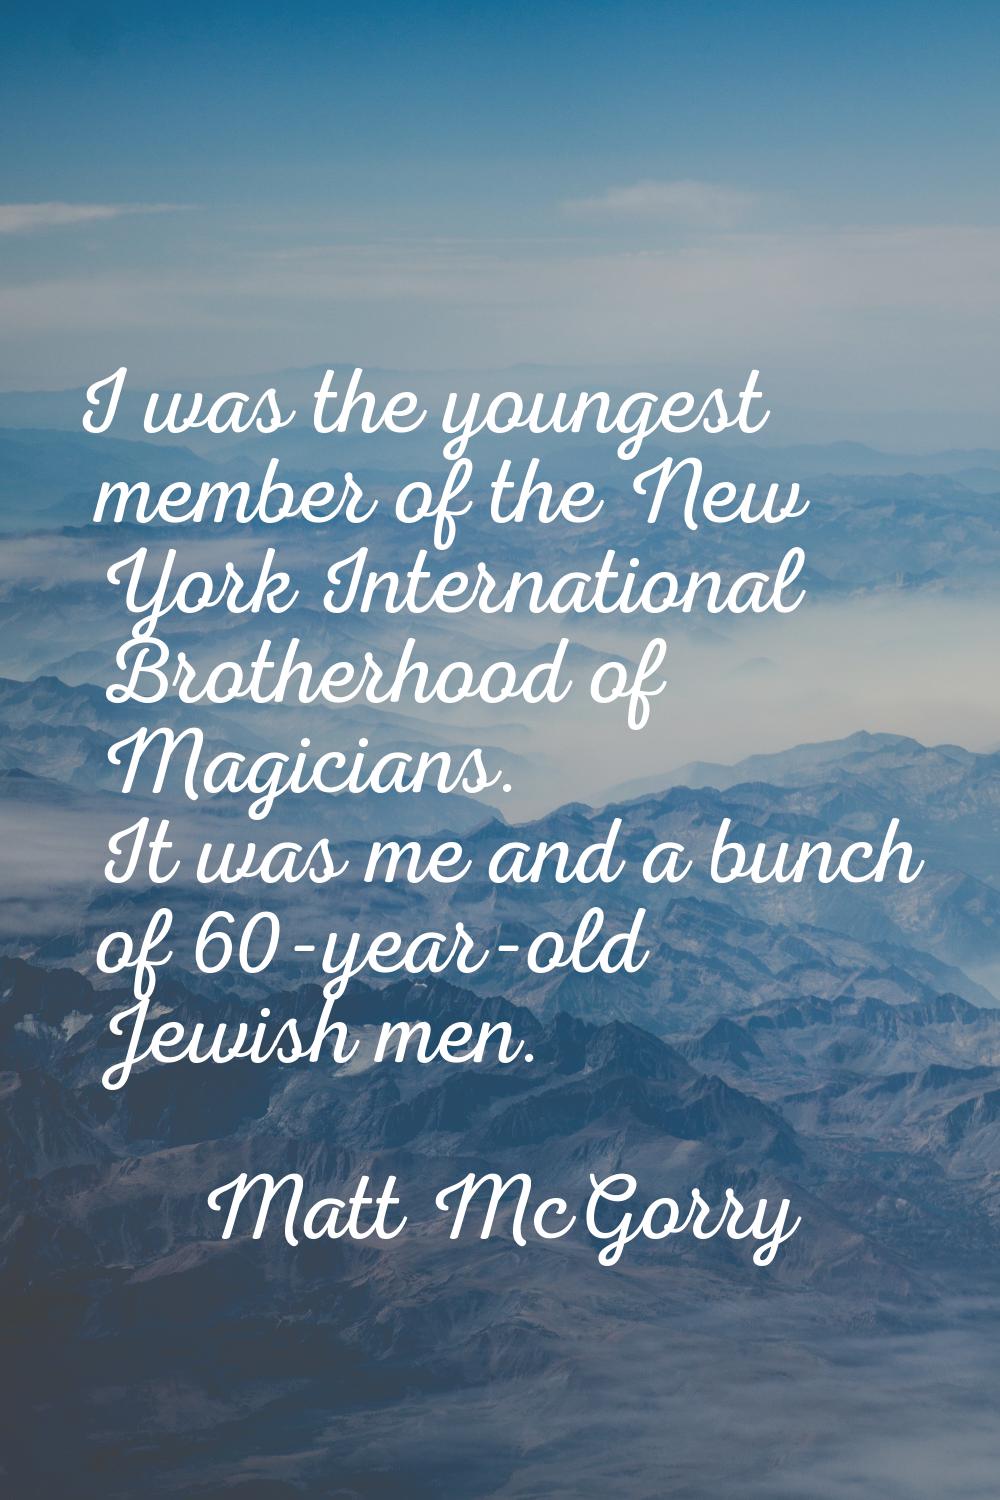 I was the youngest member of the New York International Brotherhood of Magicians. It was me and a b